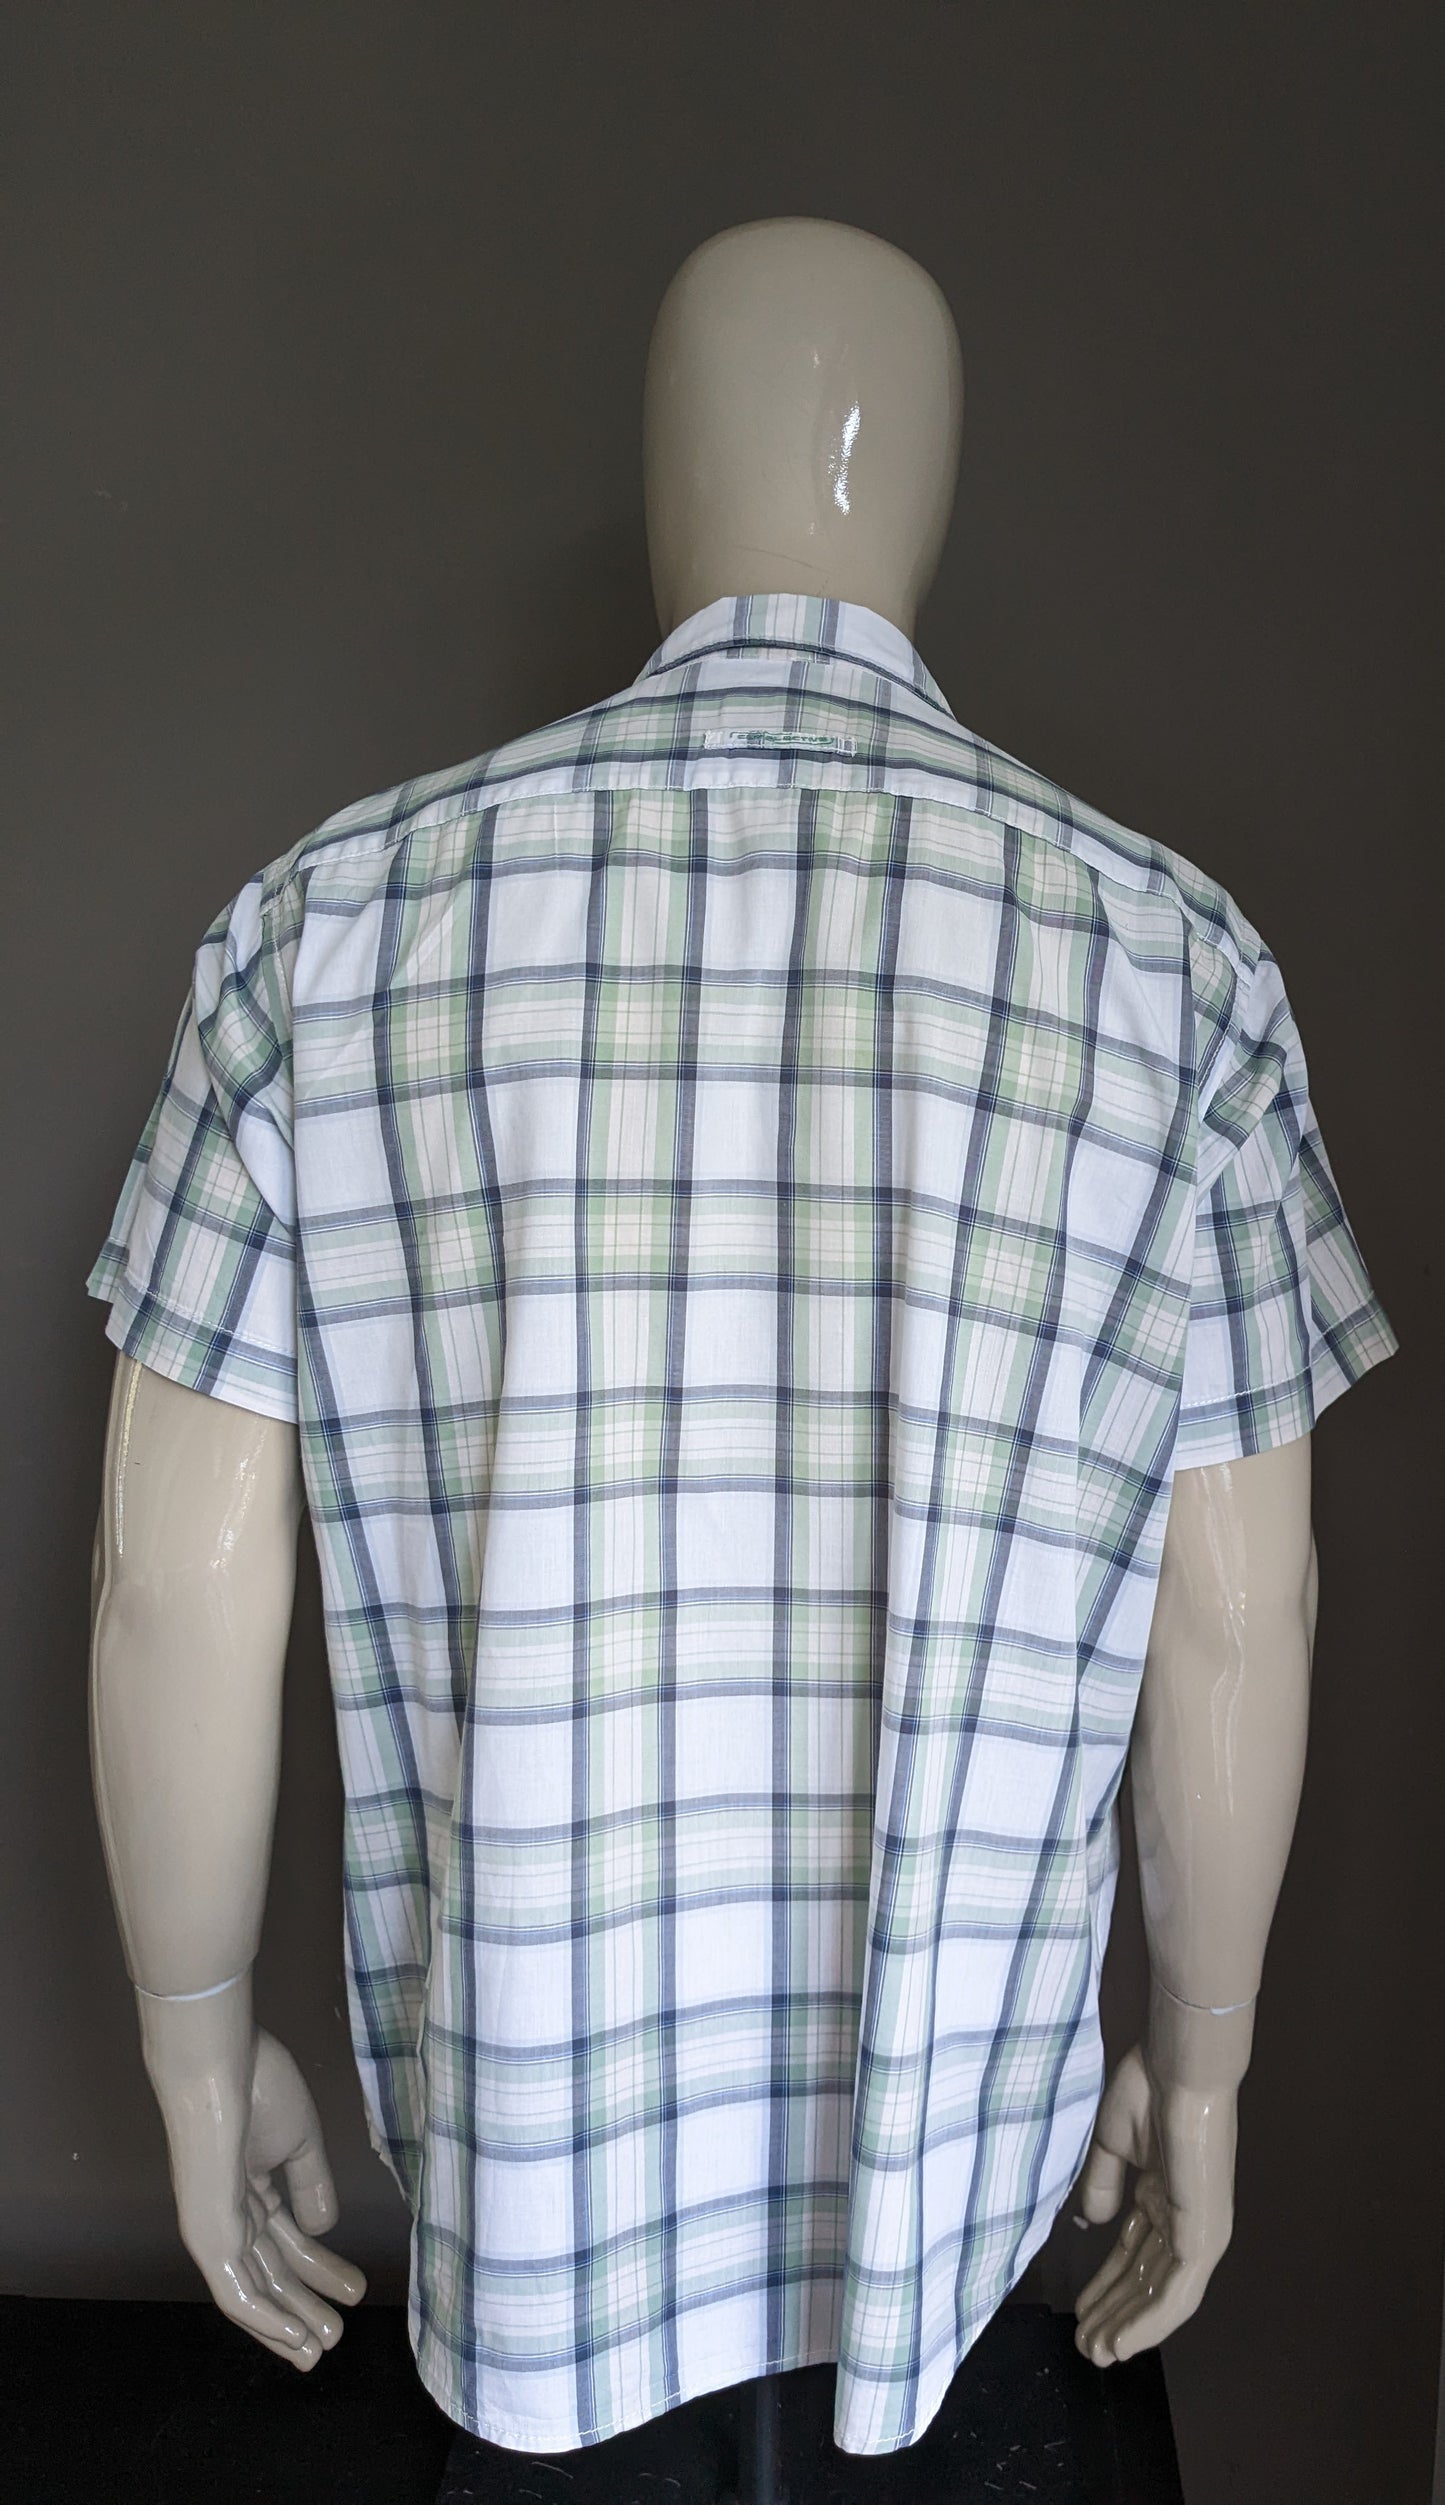 Camel Active Shirt short sleeve. Green blue white black checked. Size XL. / 2XL. Modern fit.